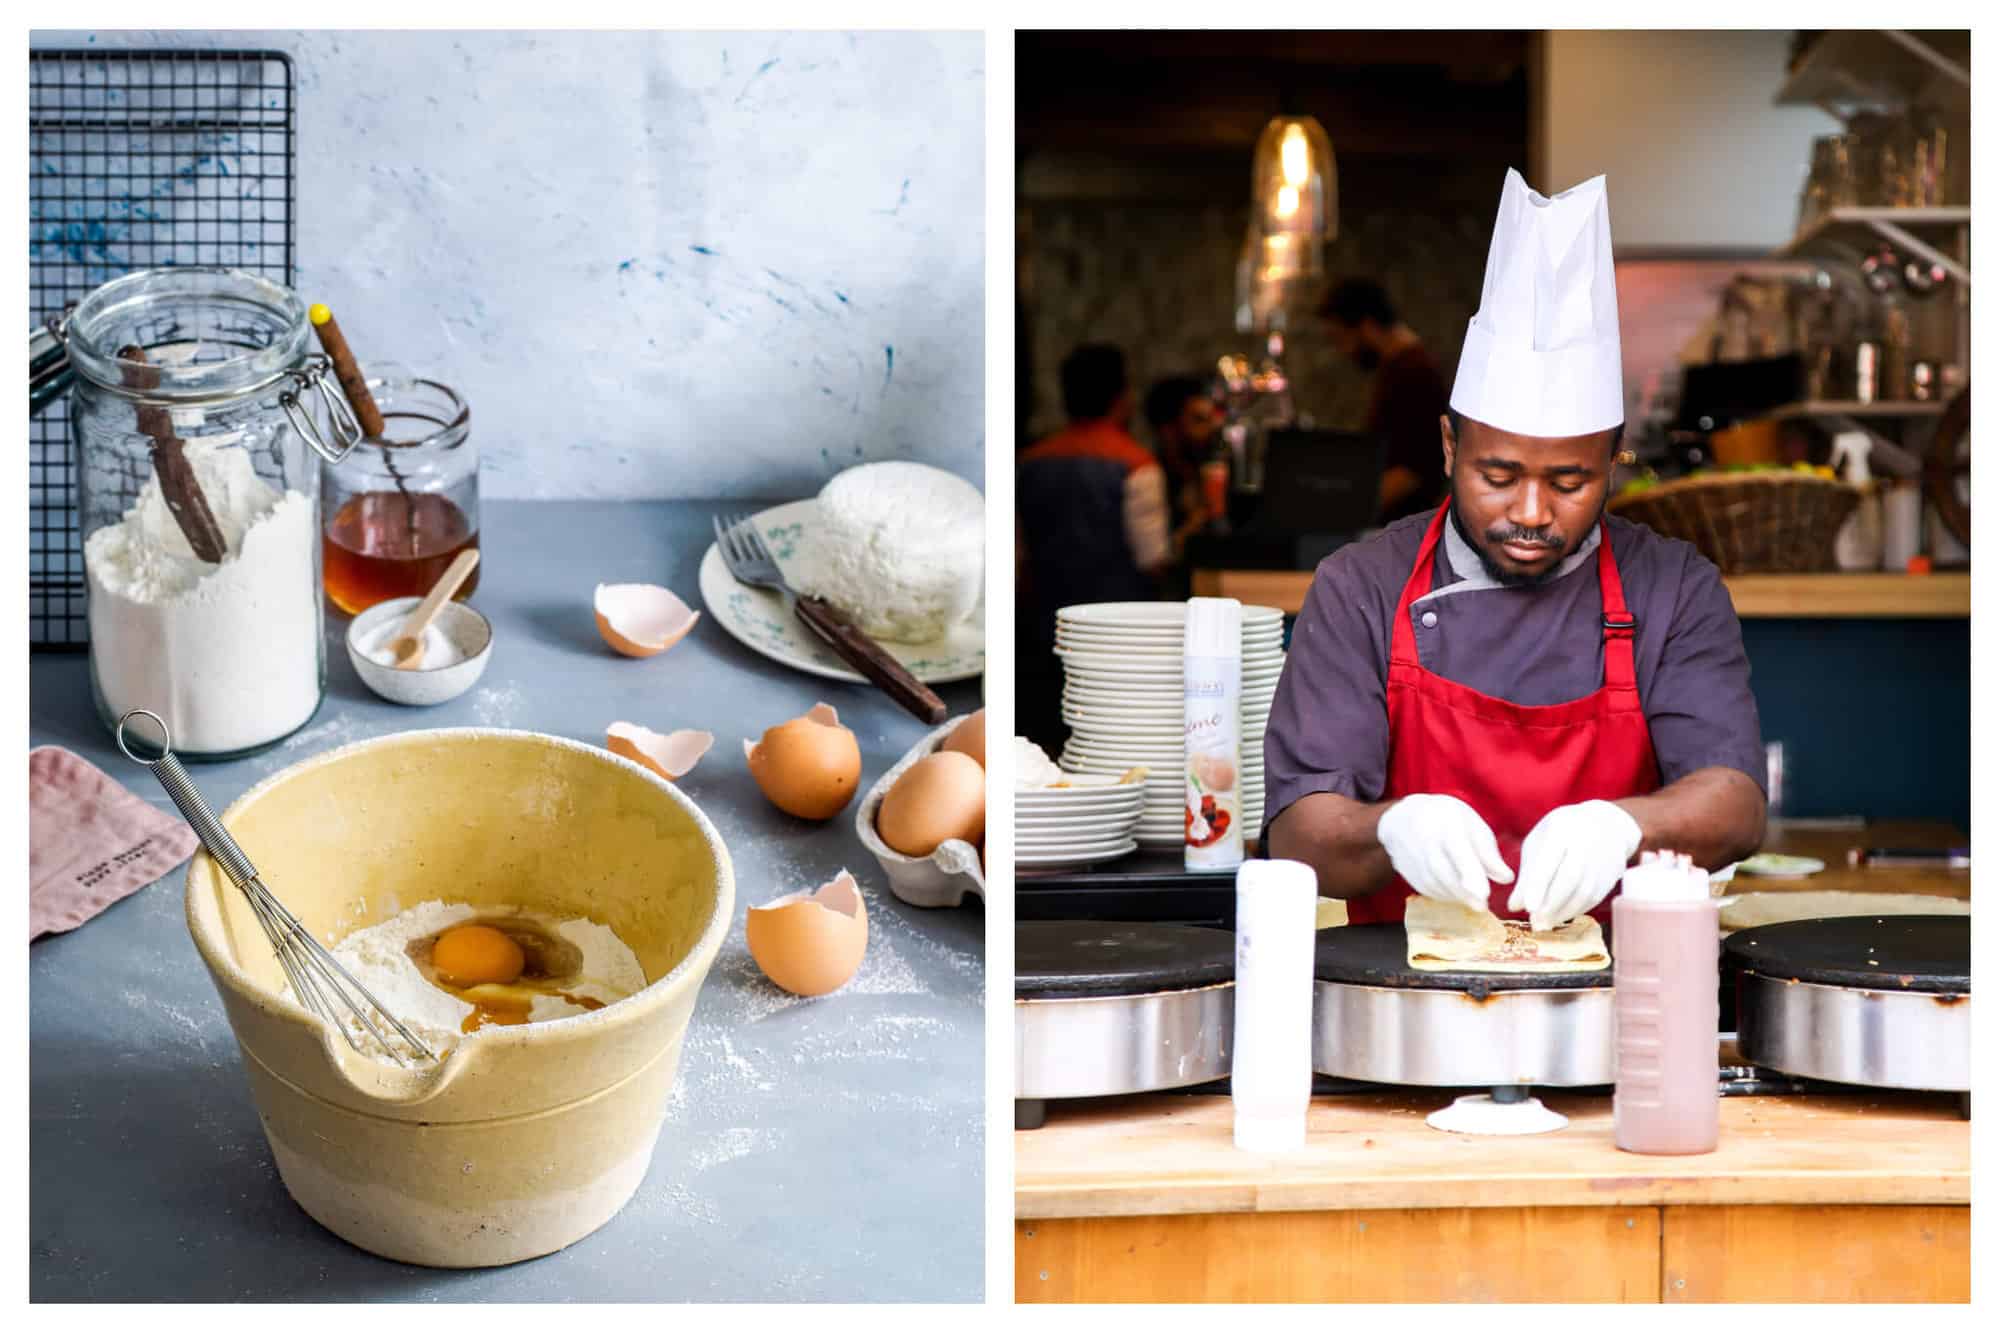 Left: a mixing bowl on a kitchen bench with a whisk, flour and eggs to make crepes. Right: a man making crepes at a creperie in Paris.